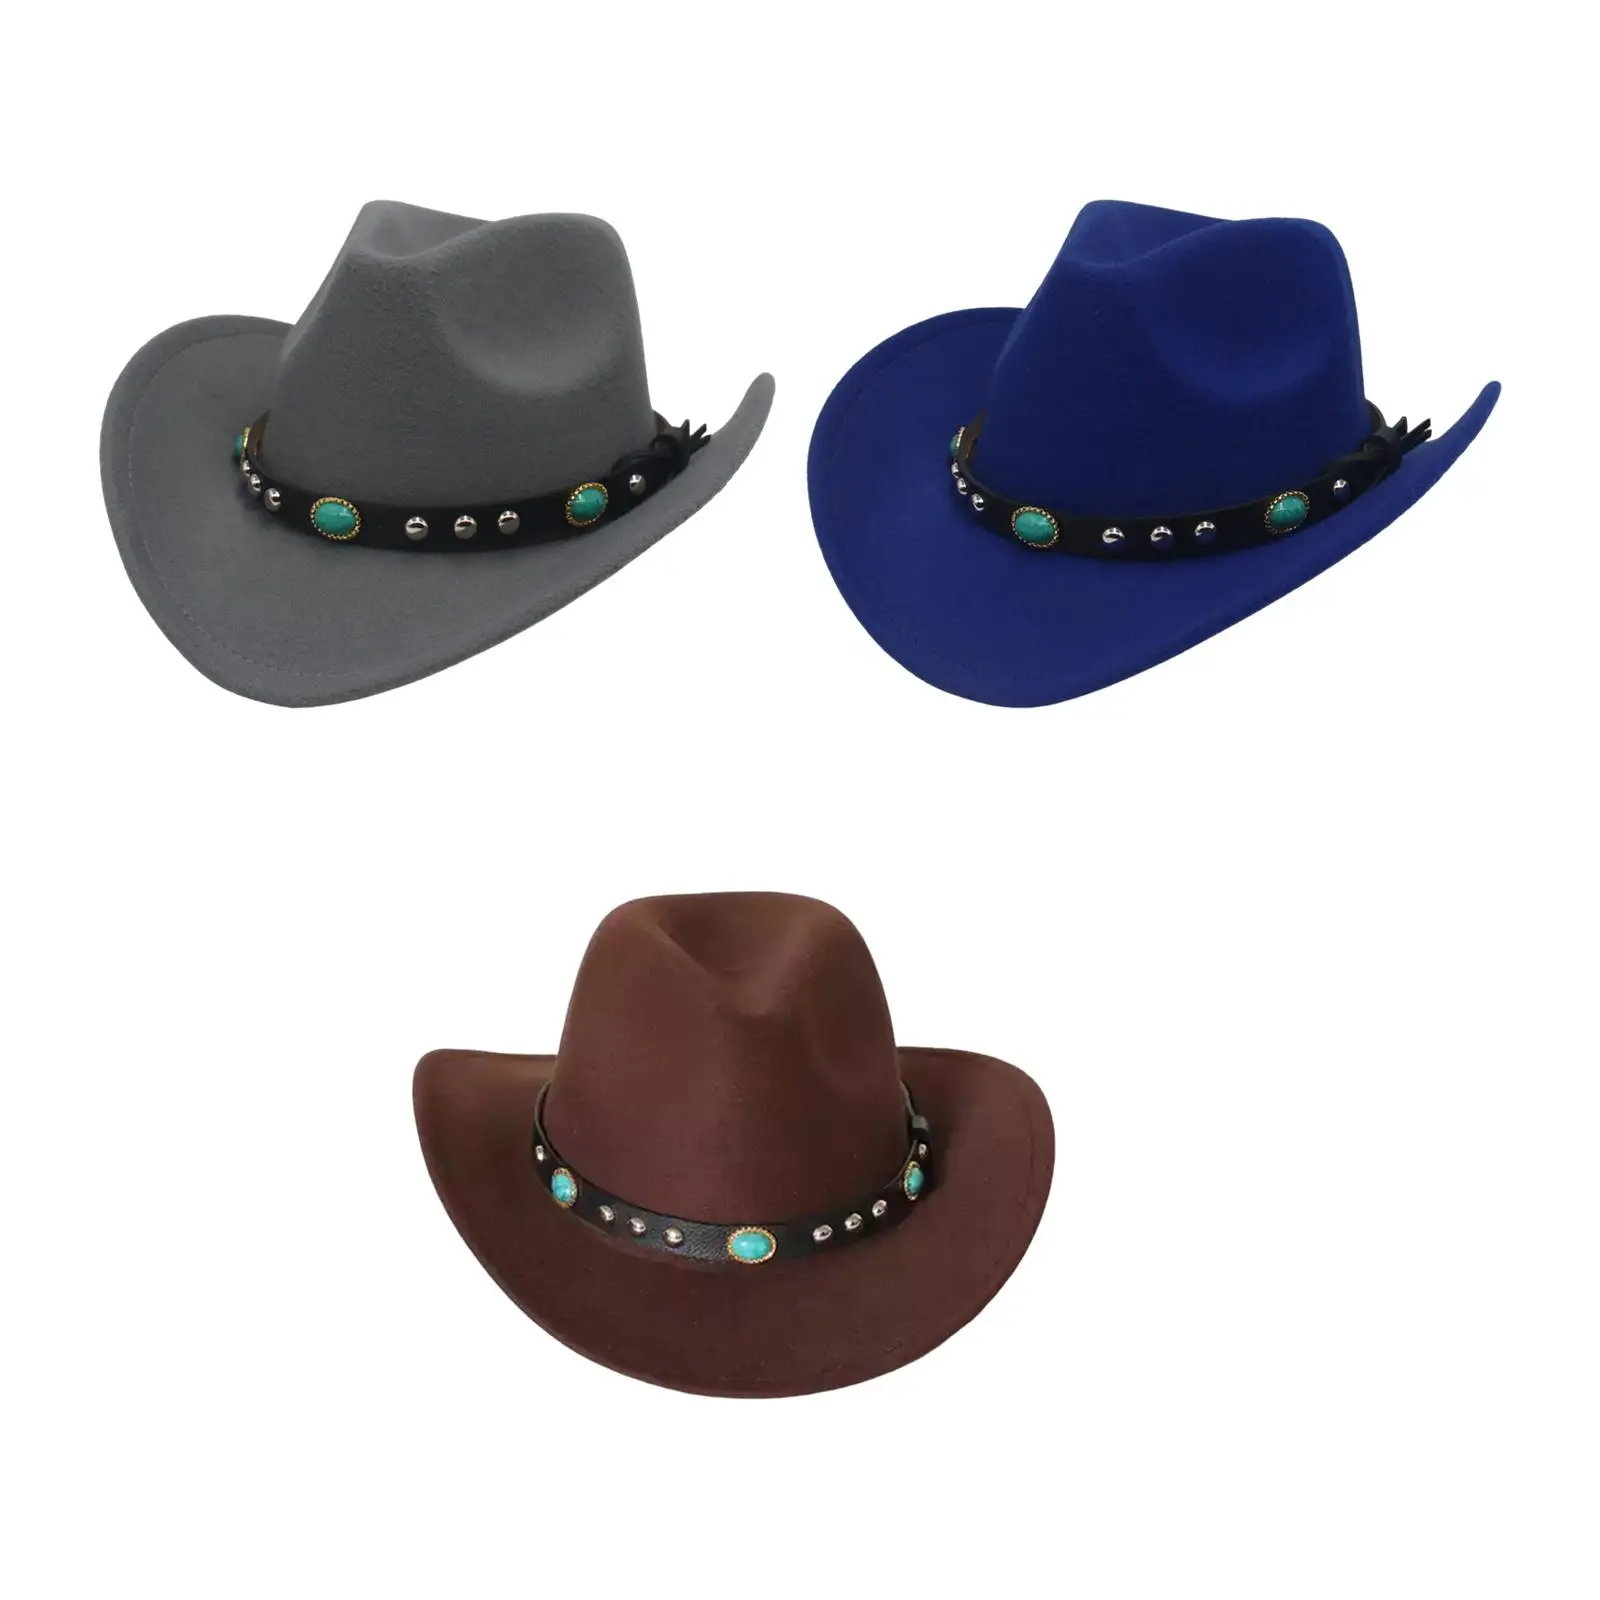 Felt Western Hat Wide Brim Buckle Panama Cowgirl Hat for Outdoor Leisure Dress up Camping Autumn